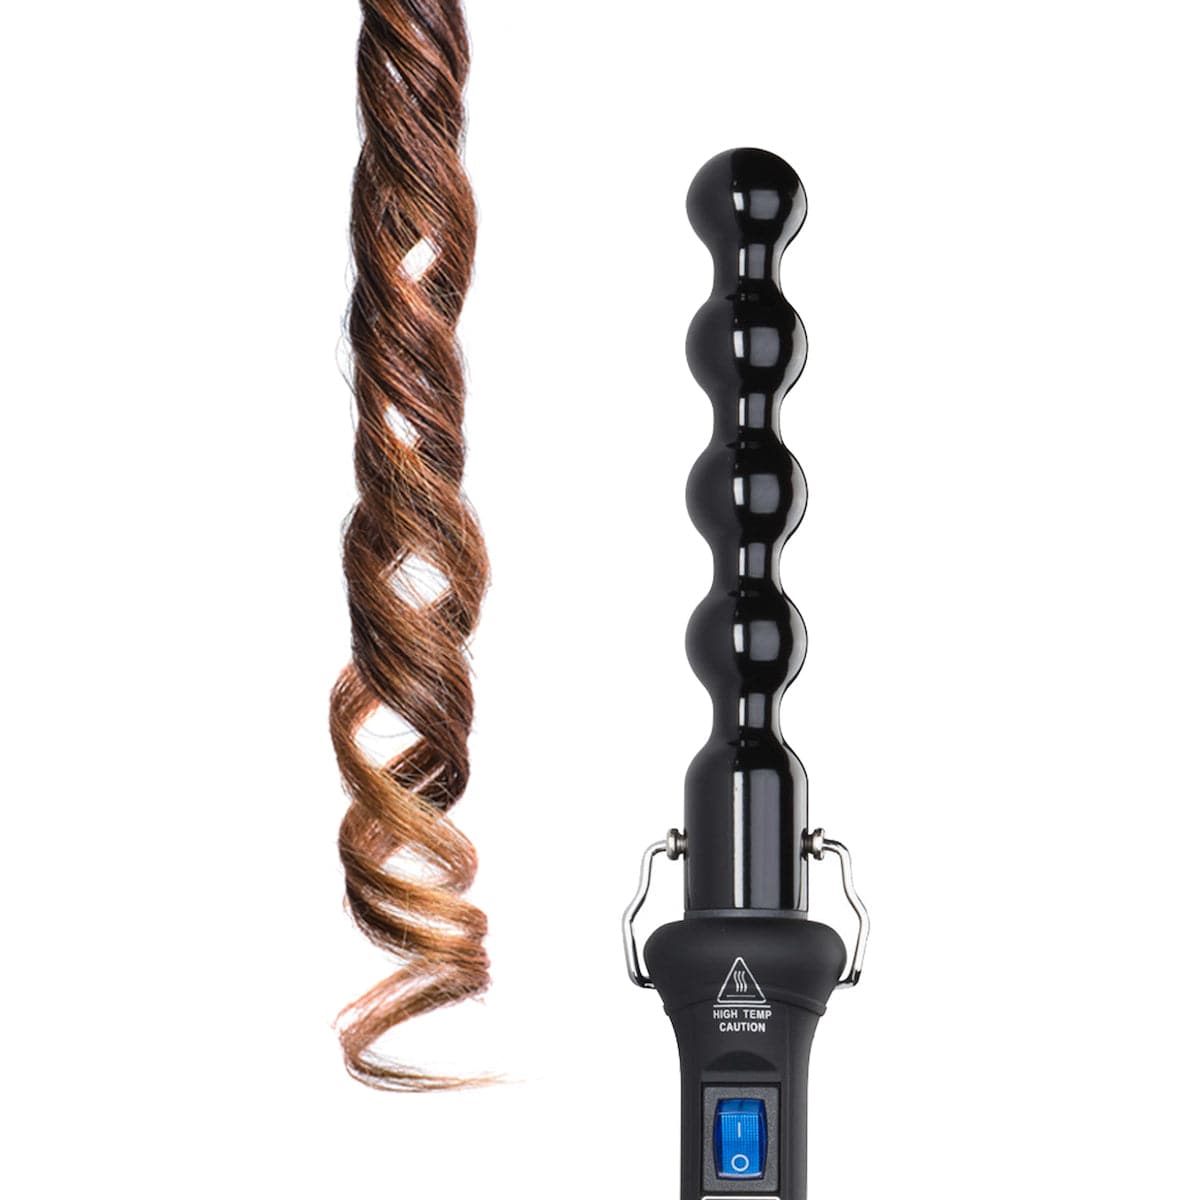 Terviiix Bubble Curling Wand, Spiral Curling Iron for Tight & Loose Curls, Curling  Wand for Long Hair, Ceramic Long Barrel Wand Curler for Fine Hair, Instant  Heat to Max 430°F, with Glove